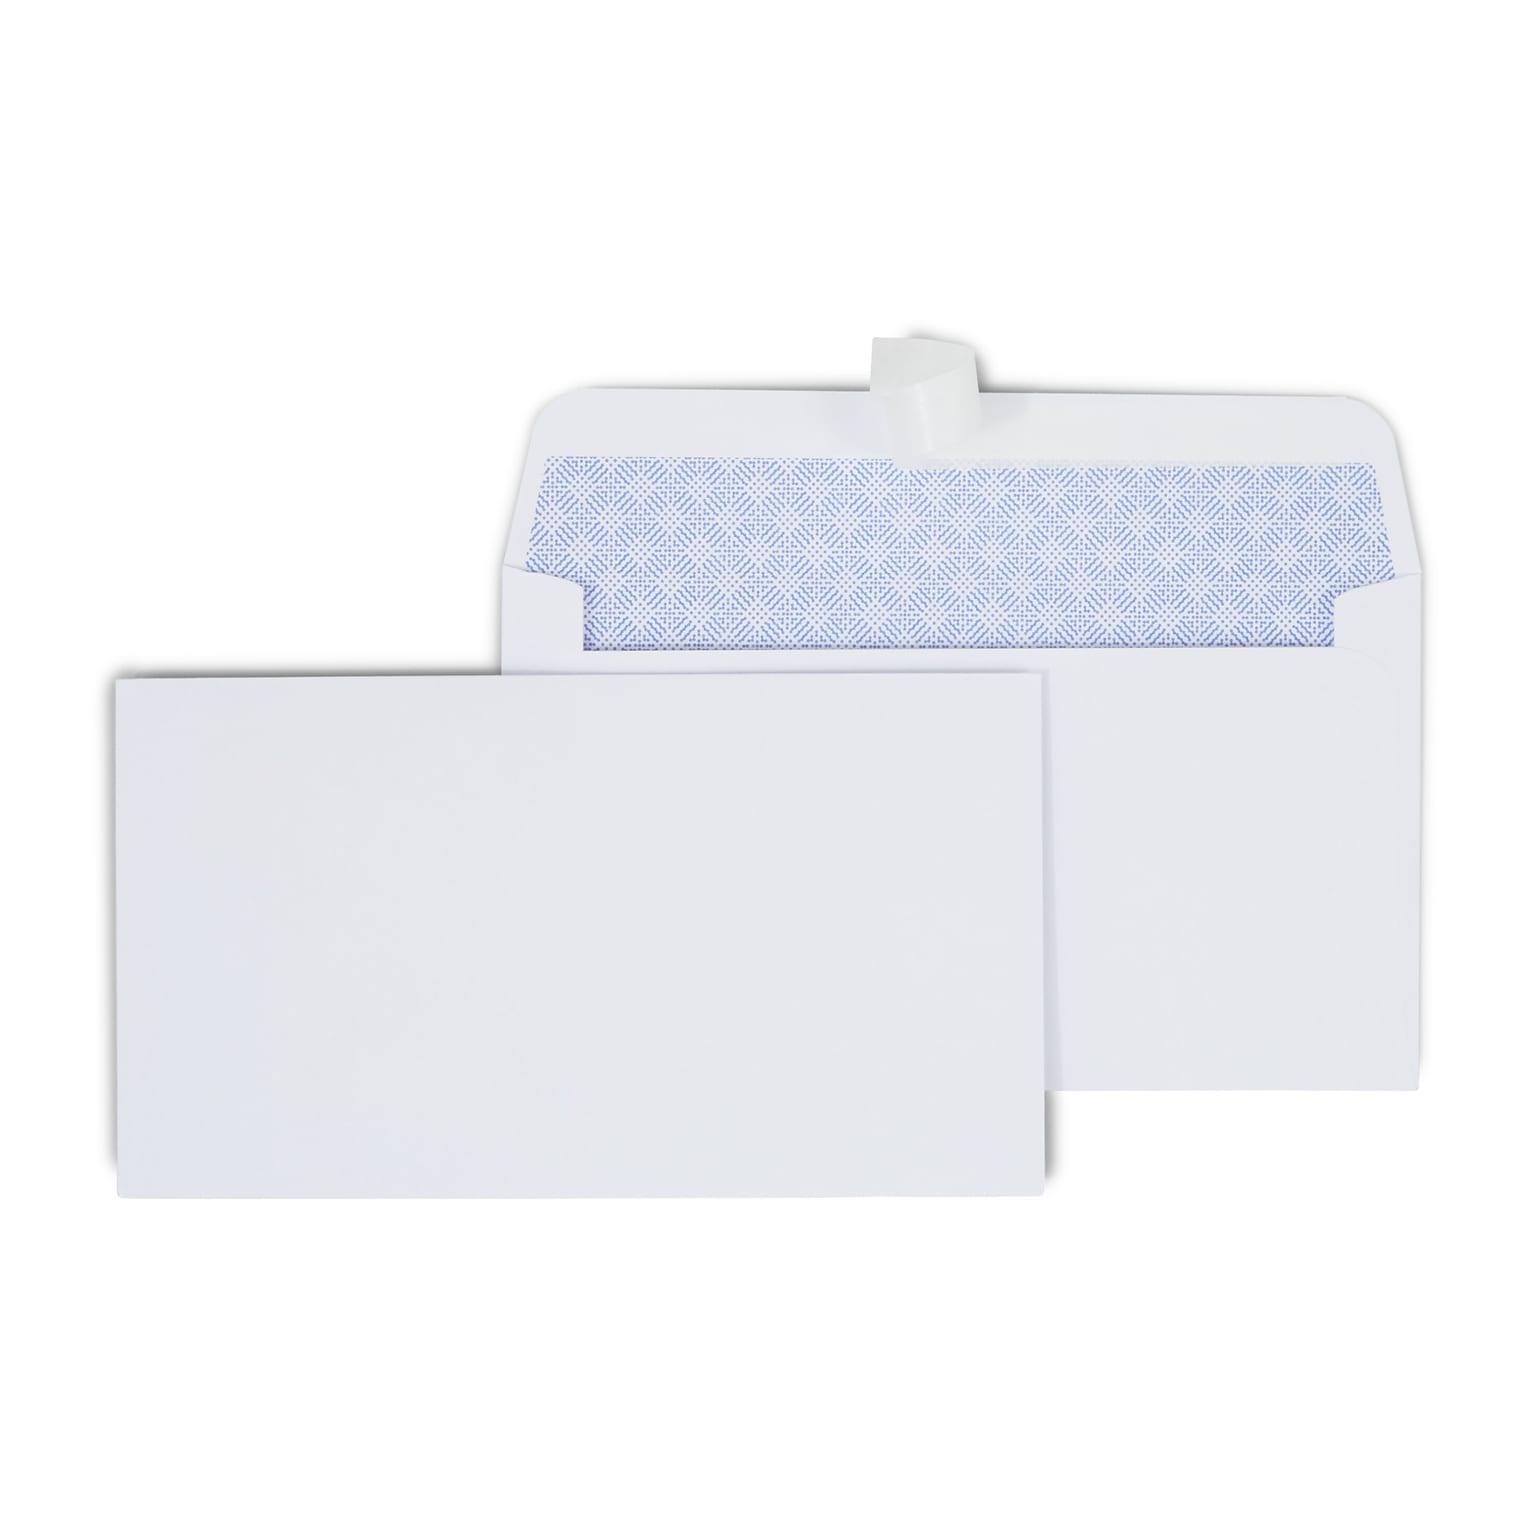 Staples EasyClose Security Tinted #6 3/4 Business Envelopes, 3 5/8 x 6 1/2, White, 100/Box (50313)